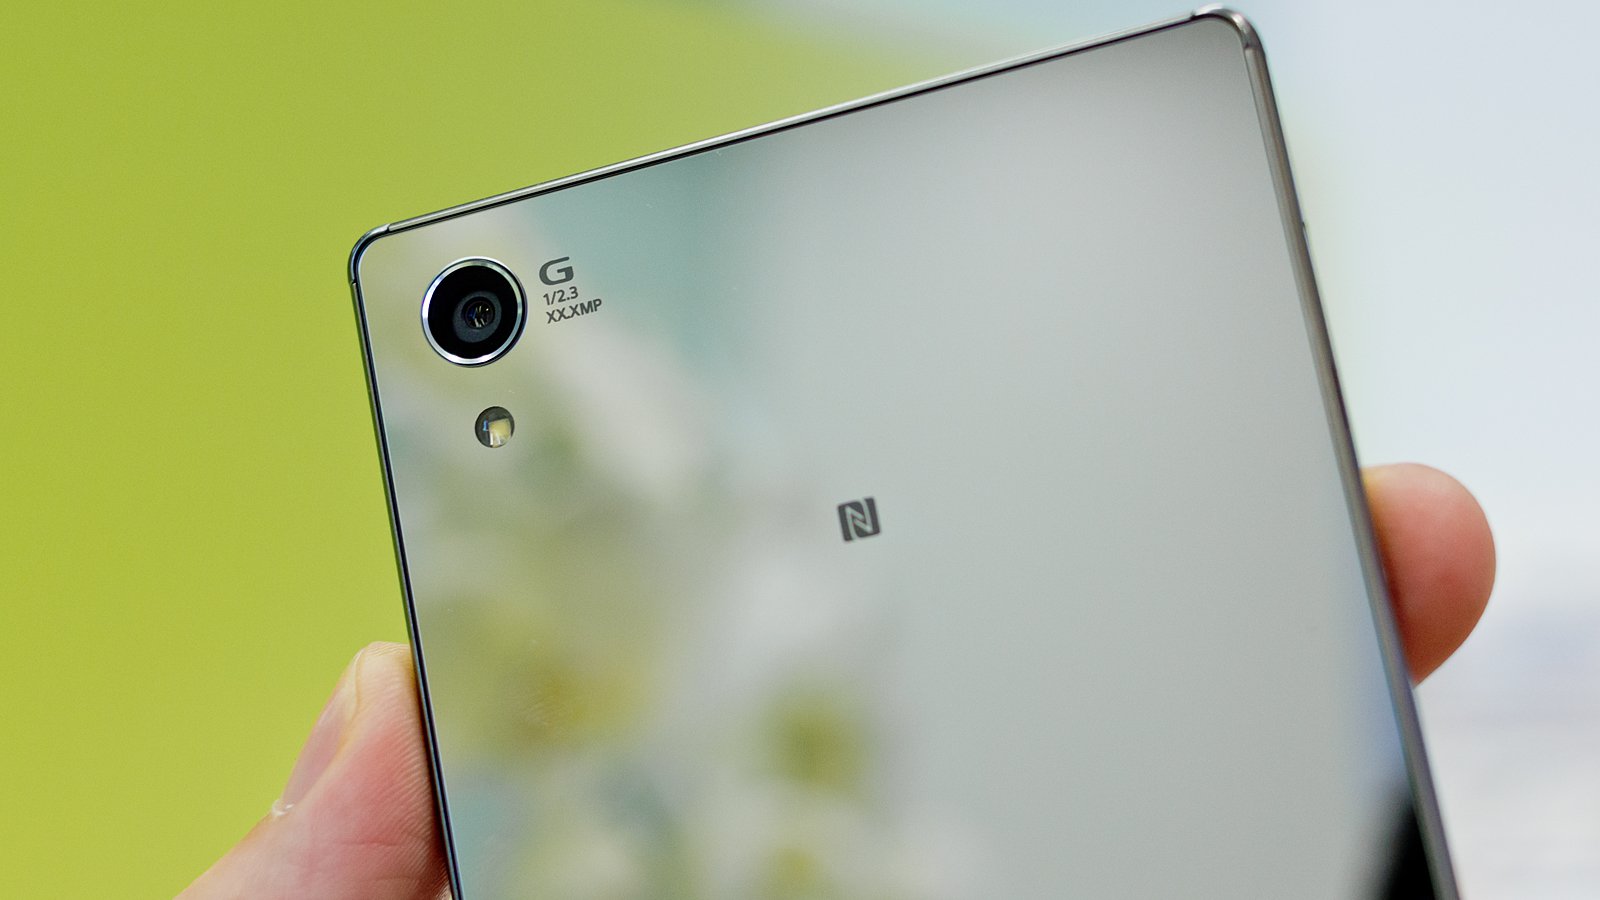 Sony Xperia Z5 and Xperia Z5 Compact in the Pricing Options